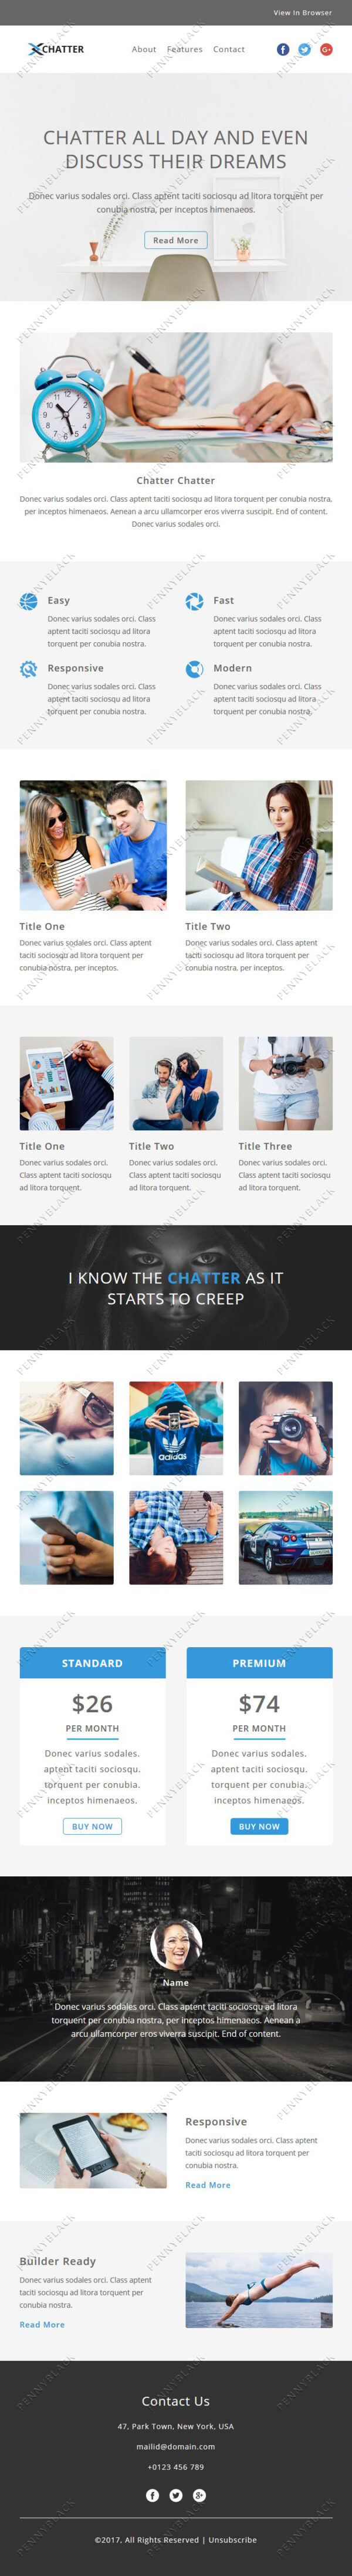 Chatter - Responsive Email Template